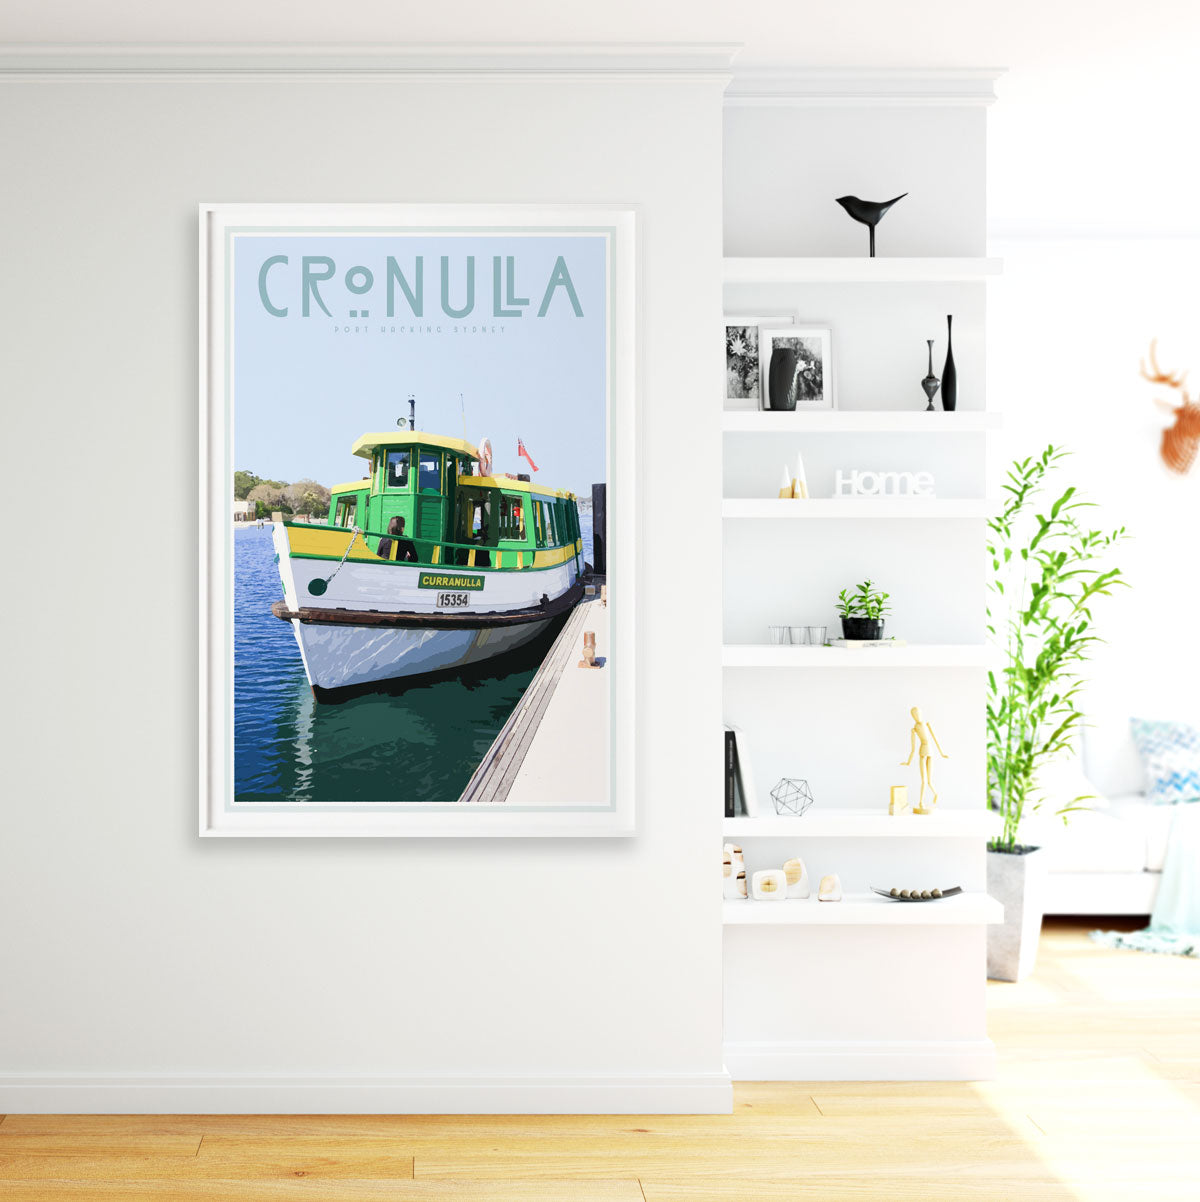 Cronulla ferry vintage style travel print designed by places we luv